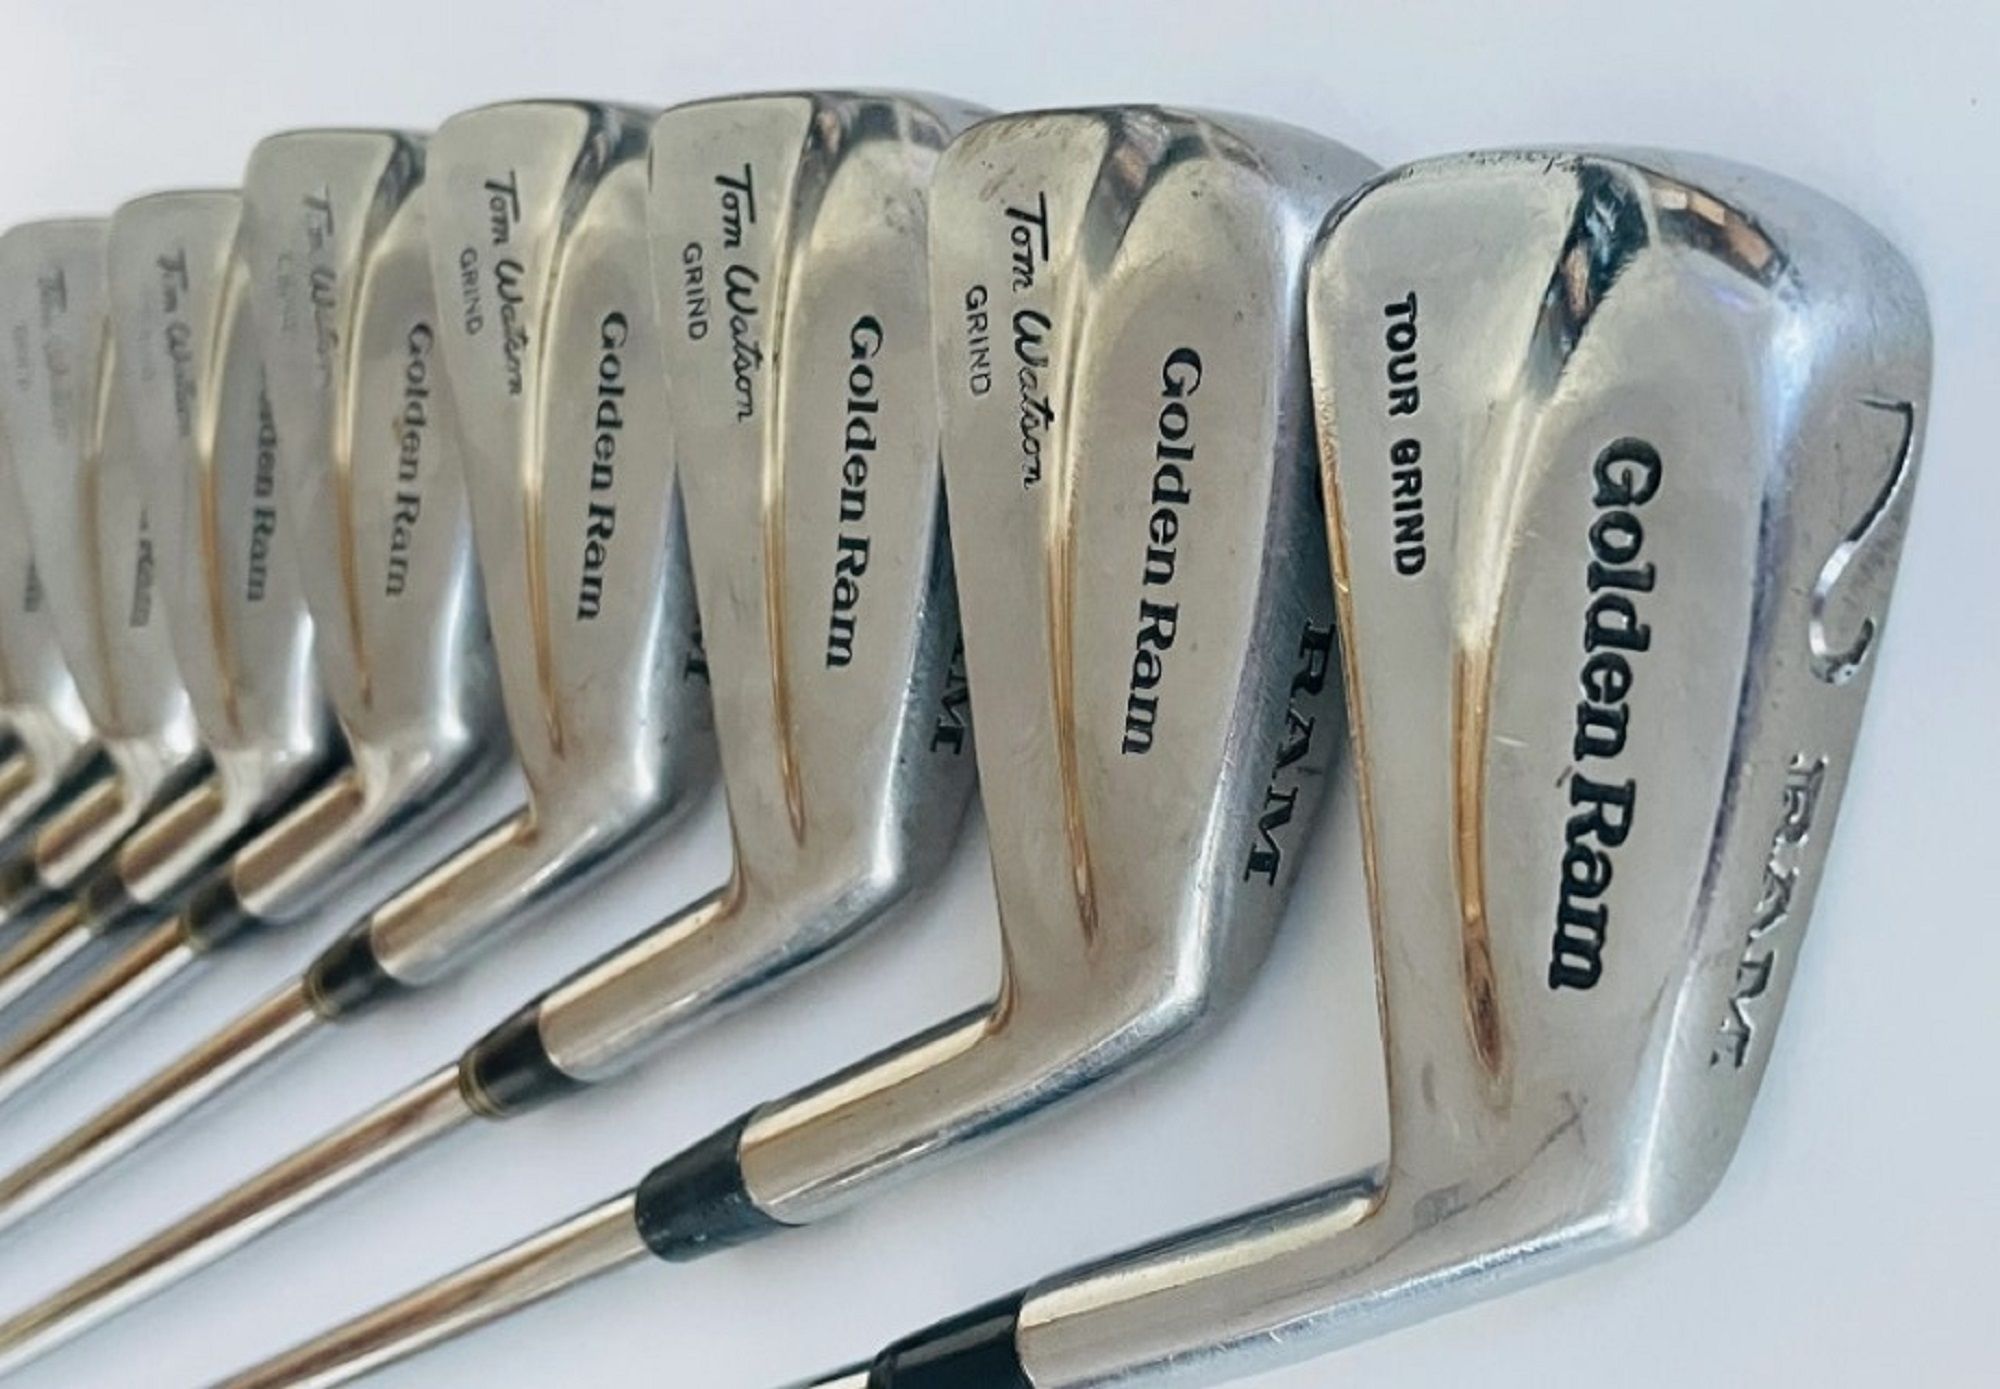 A picture of Golden Ram Tom Watson Tour Grind blade golf irons